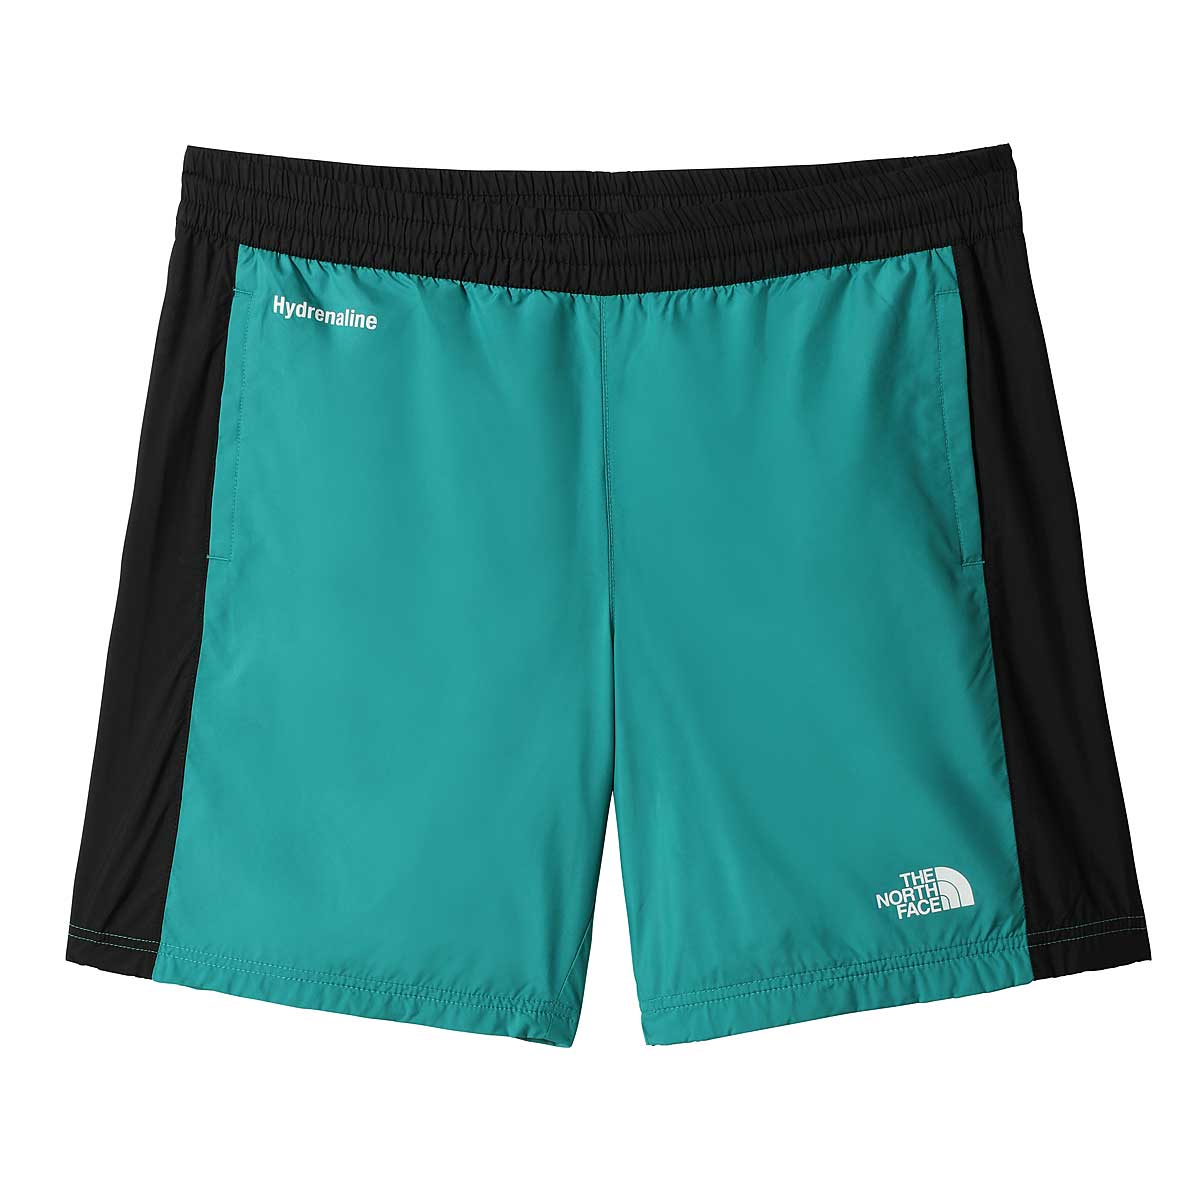 The North Face Hydrenaline Short 2000, Porcelain Green